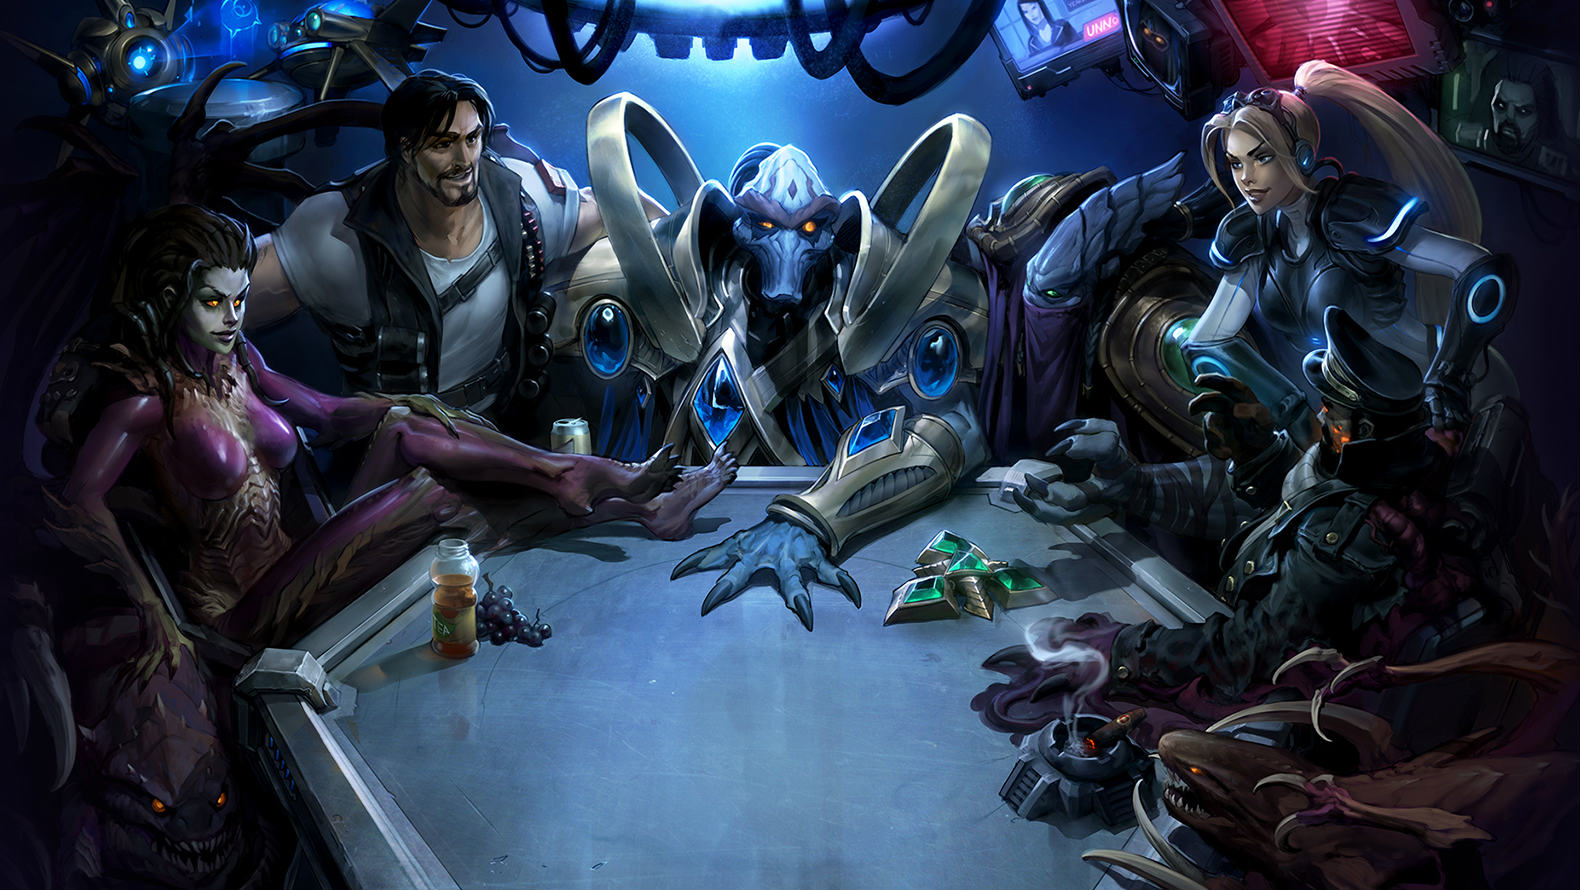 STARCRAFT II. Series anniversary art from Blizzard shows key characters in a rare moment of non-conflict. Illustration from Blizzard   